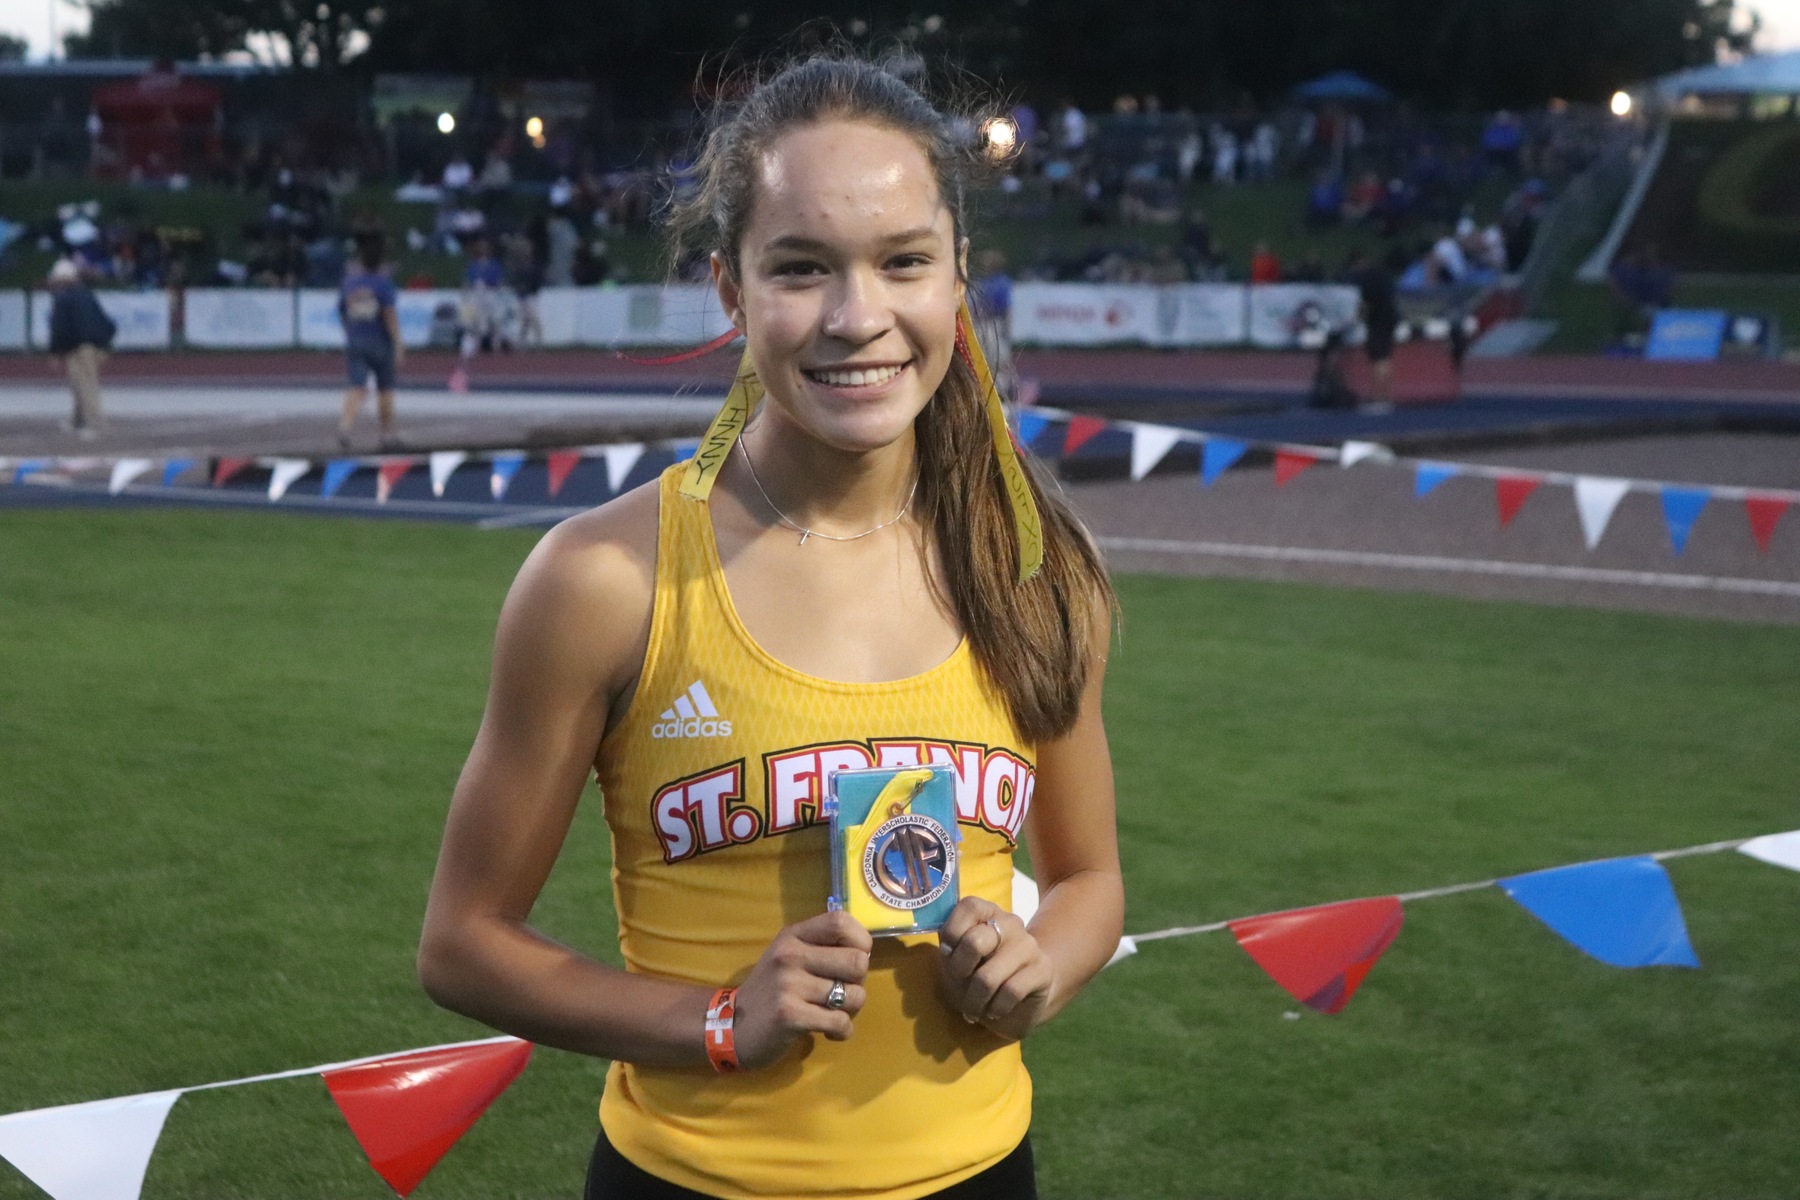 Isabella Fauria Places Fourth in 800 Meters at State Meet